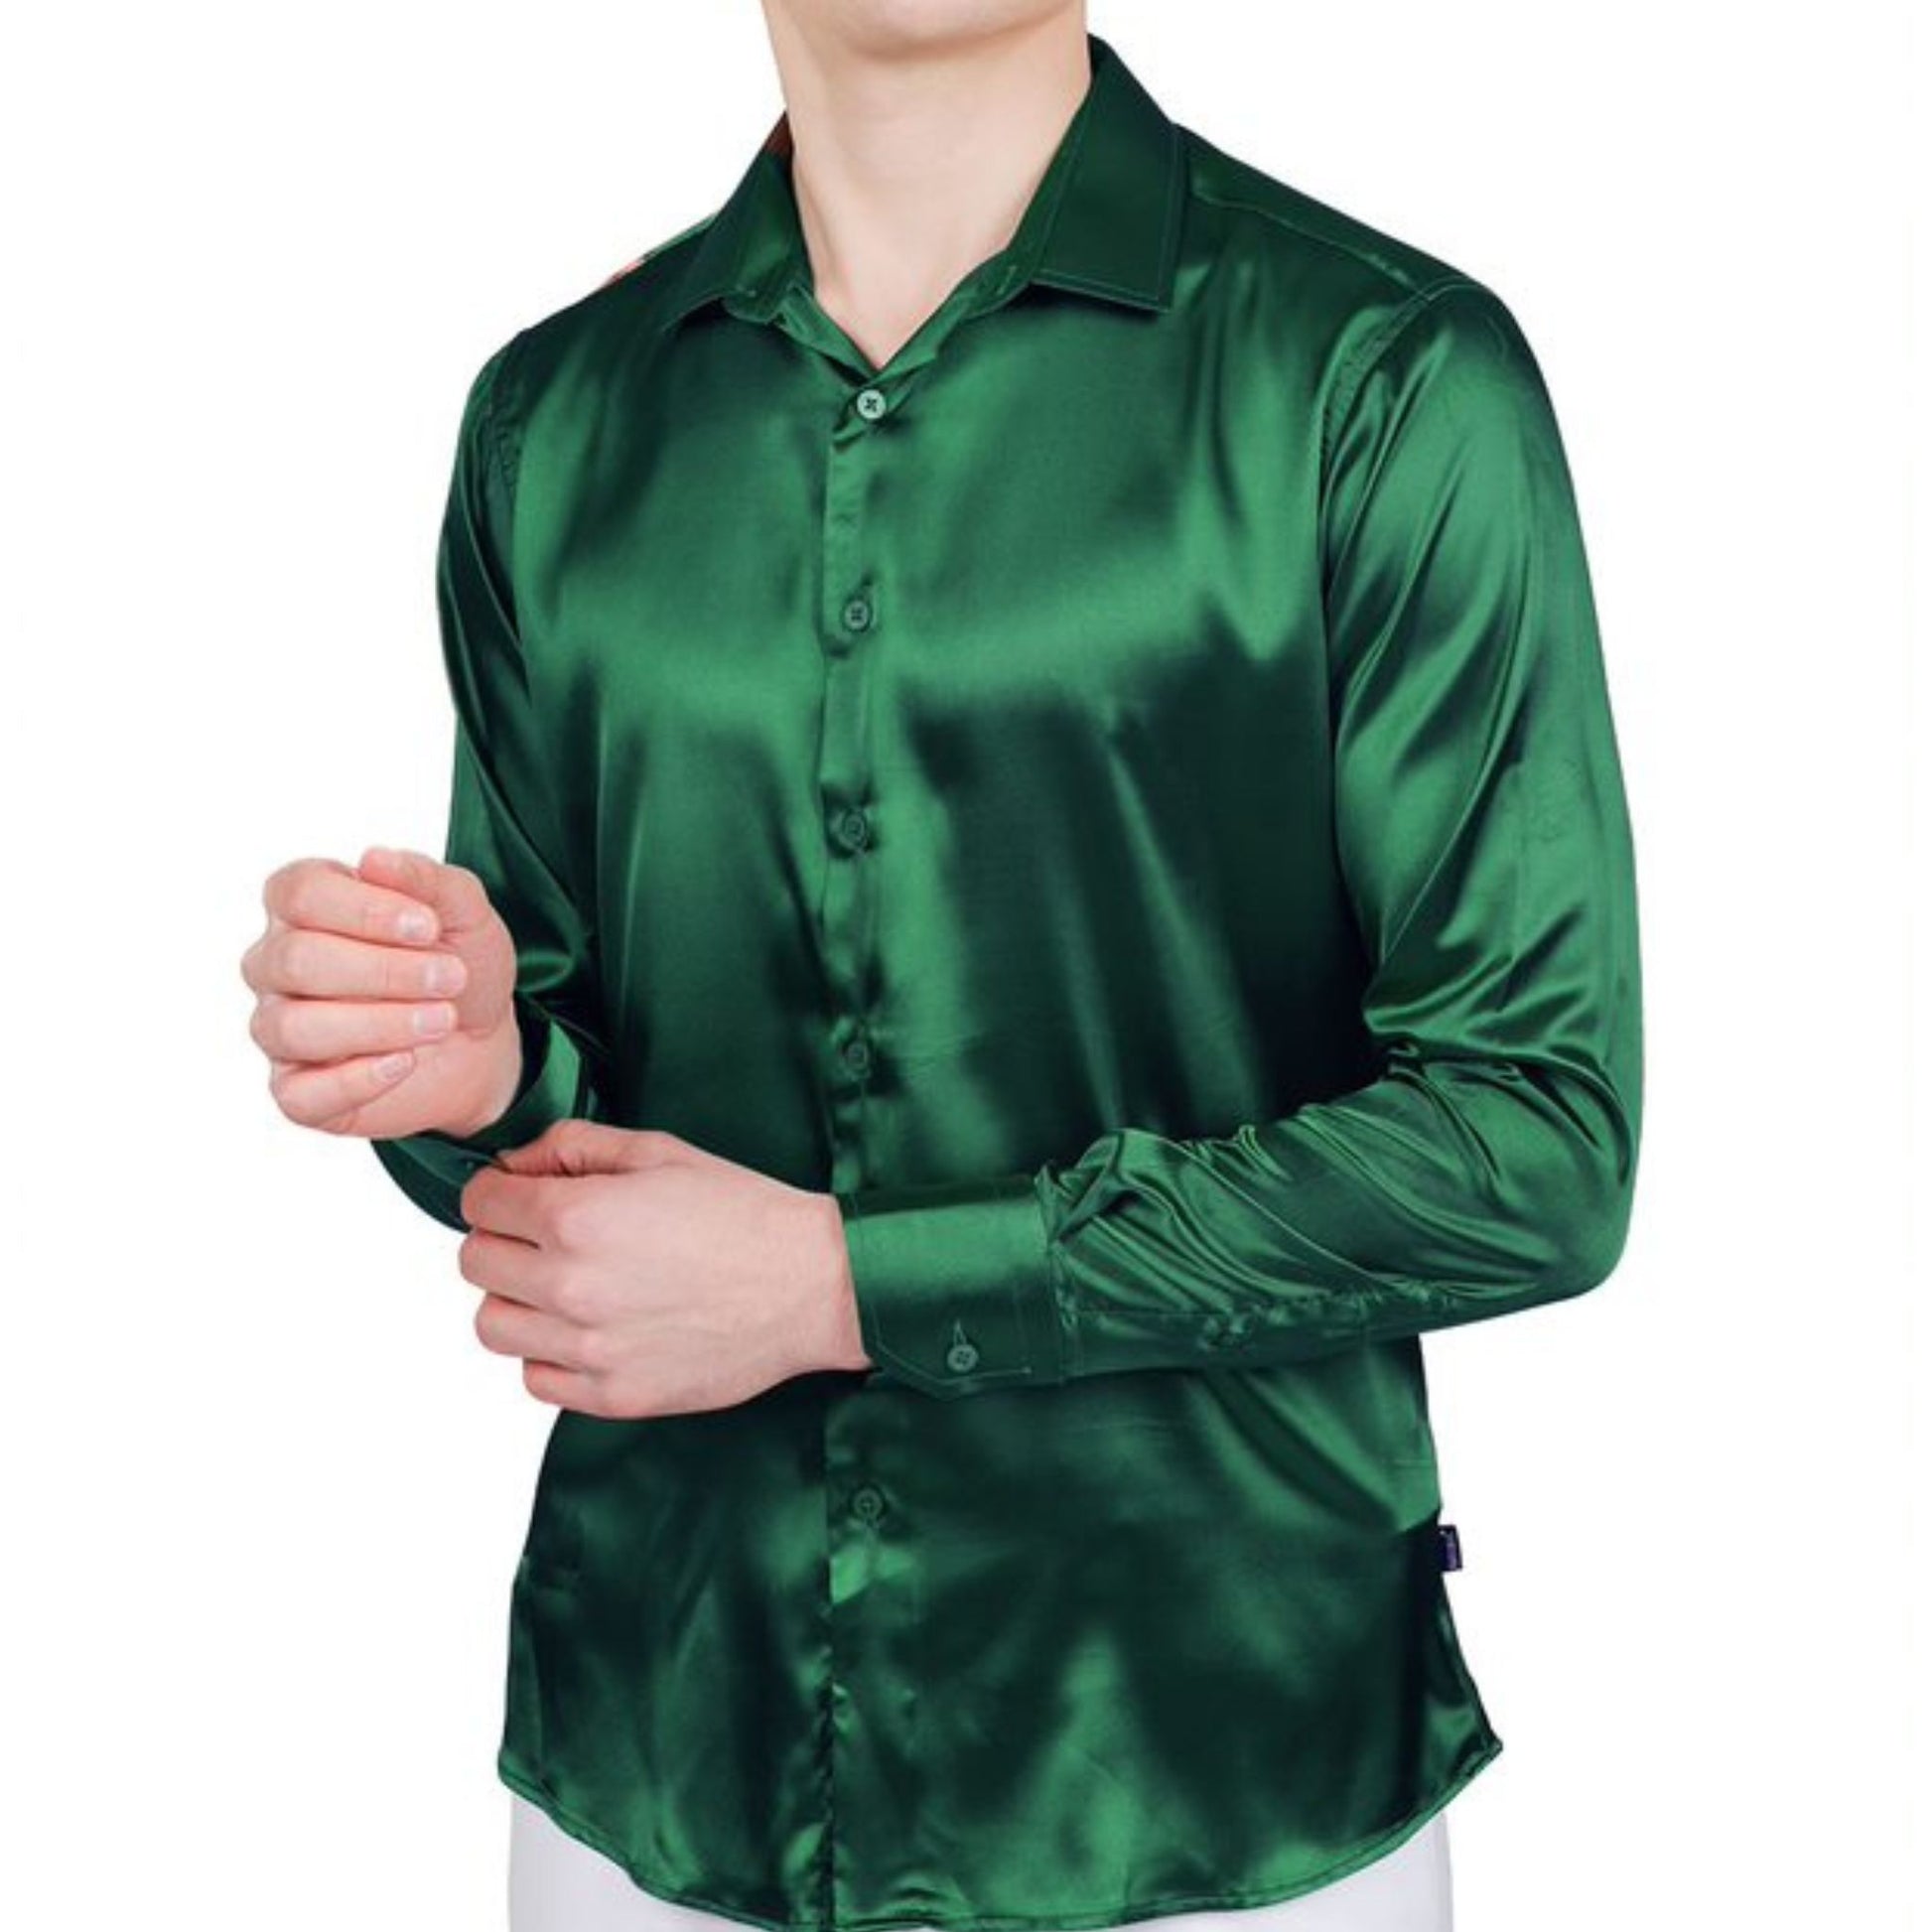 Sharp-dressed man in an emerald green satin shirt, ideal for upscale formal events.